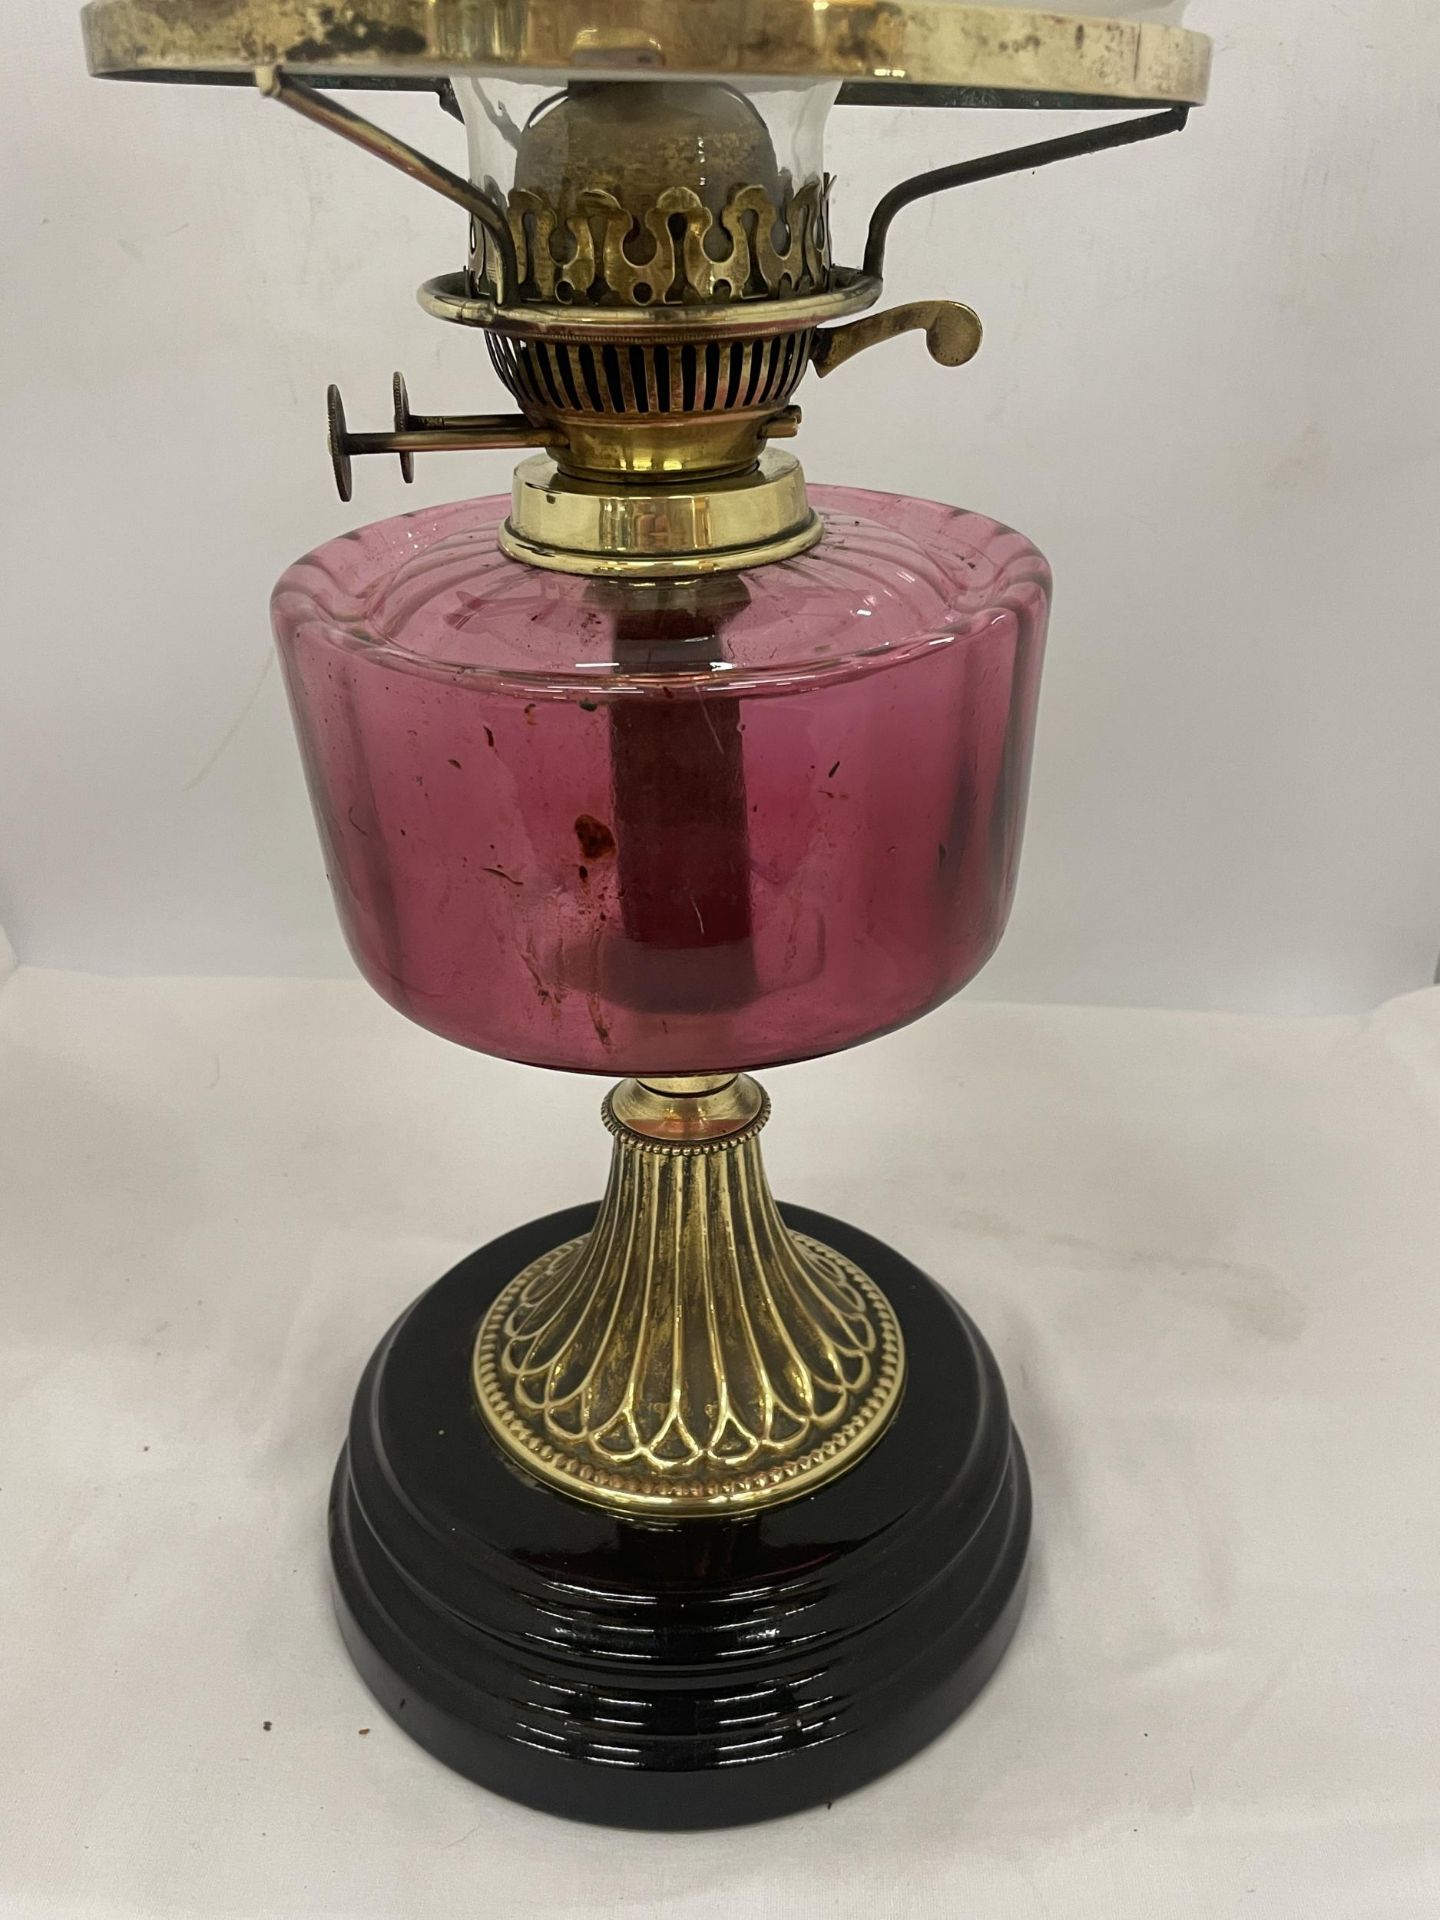 A VINTAGE OIL LAMP WITH WHITE GLASS SHADE, GLASS FUNNEL, CRANBERRY COLOURED GLASS OIL RESERVOIR - Image 3 of 3